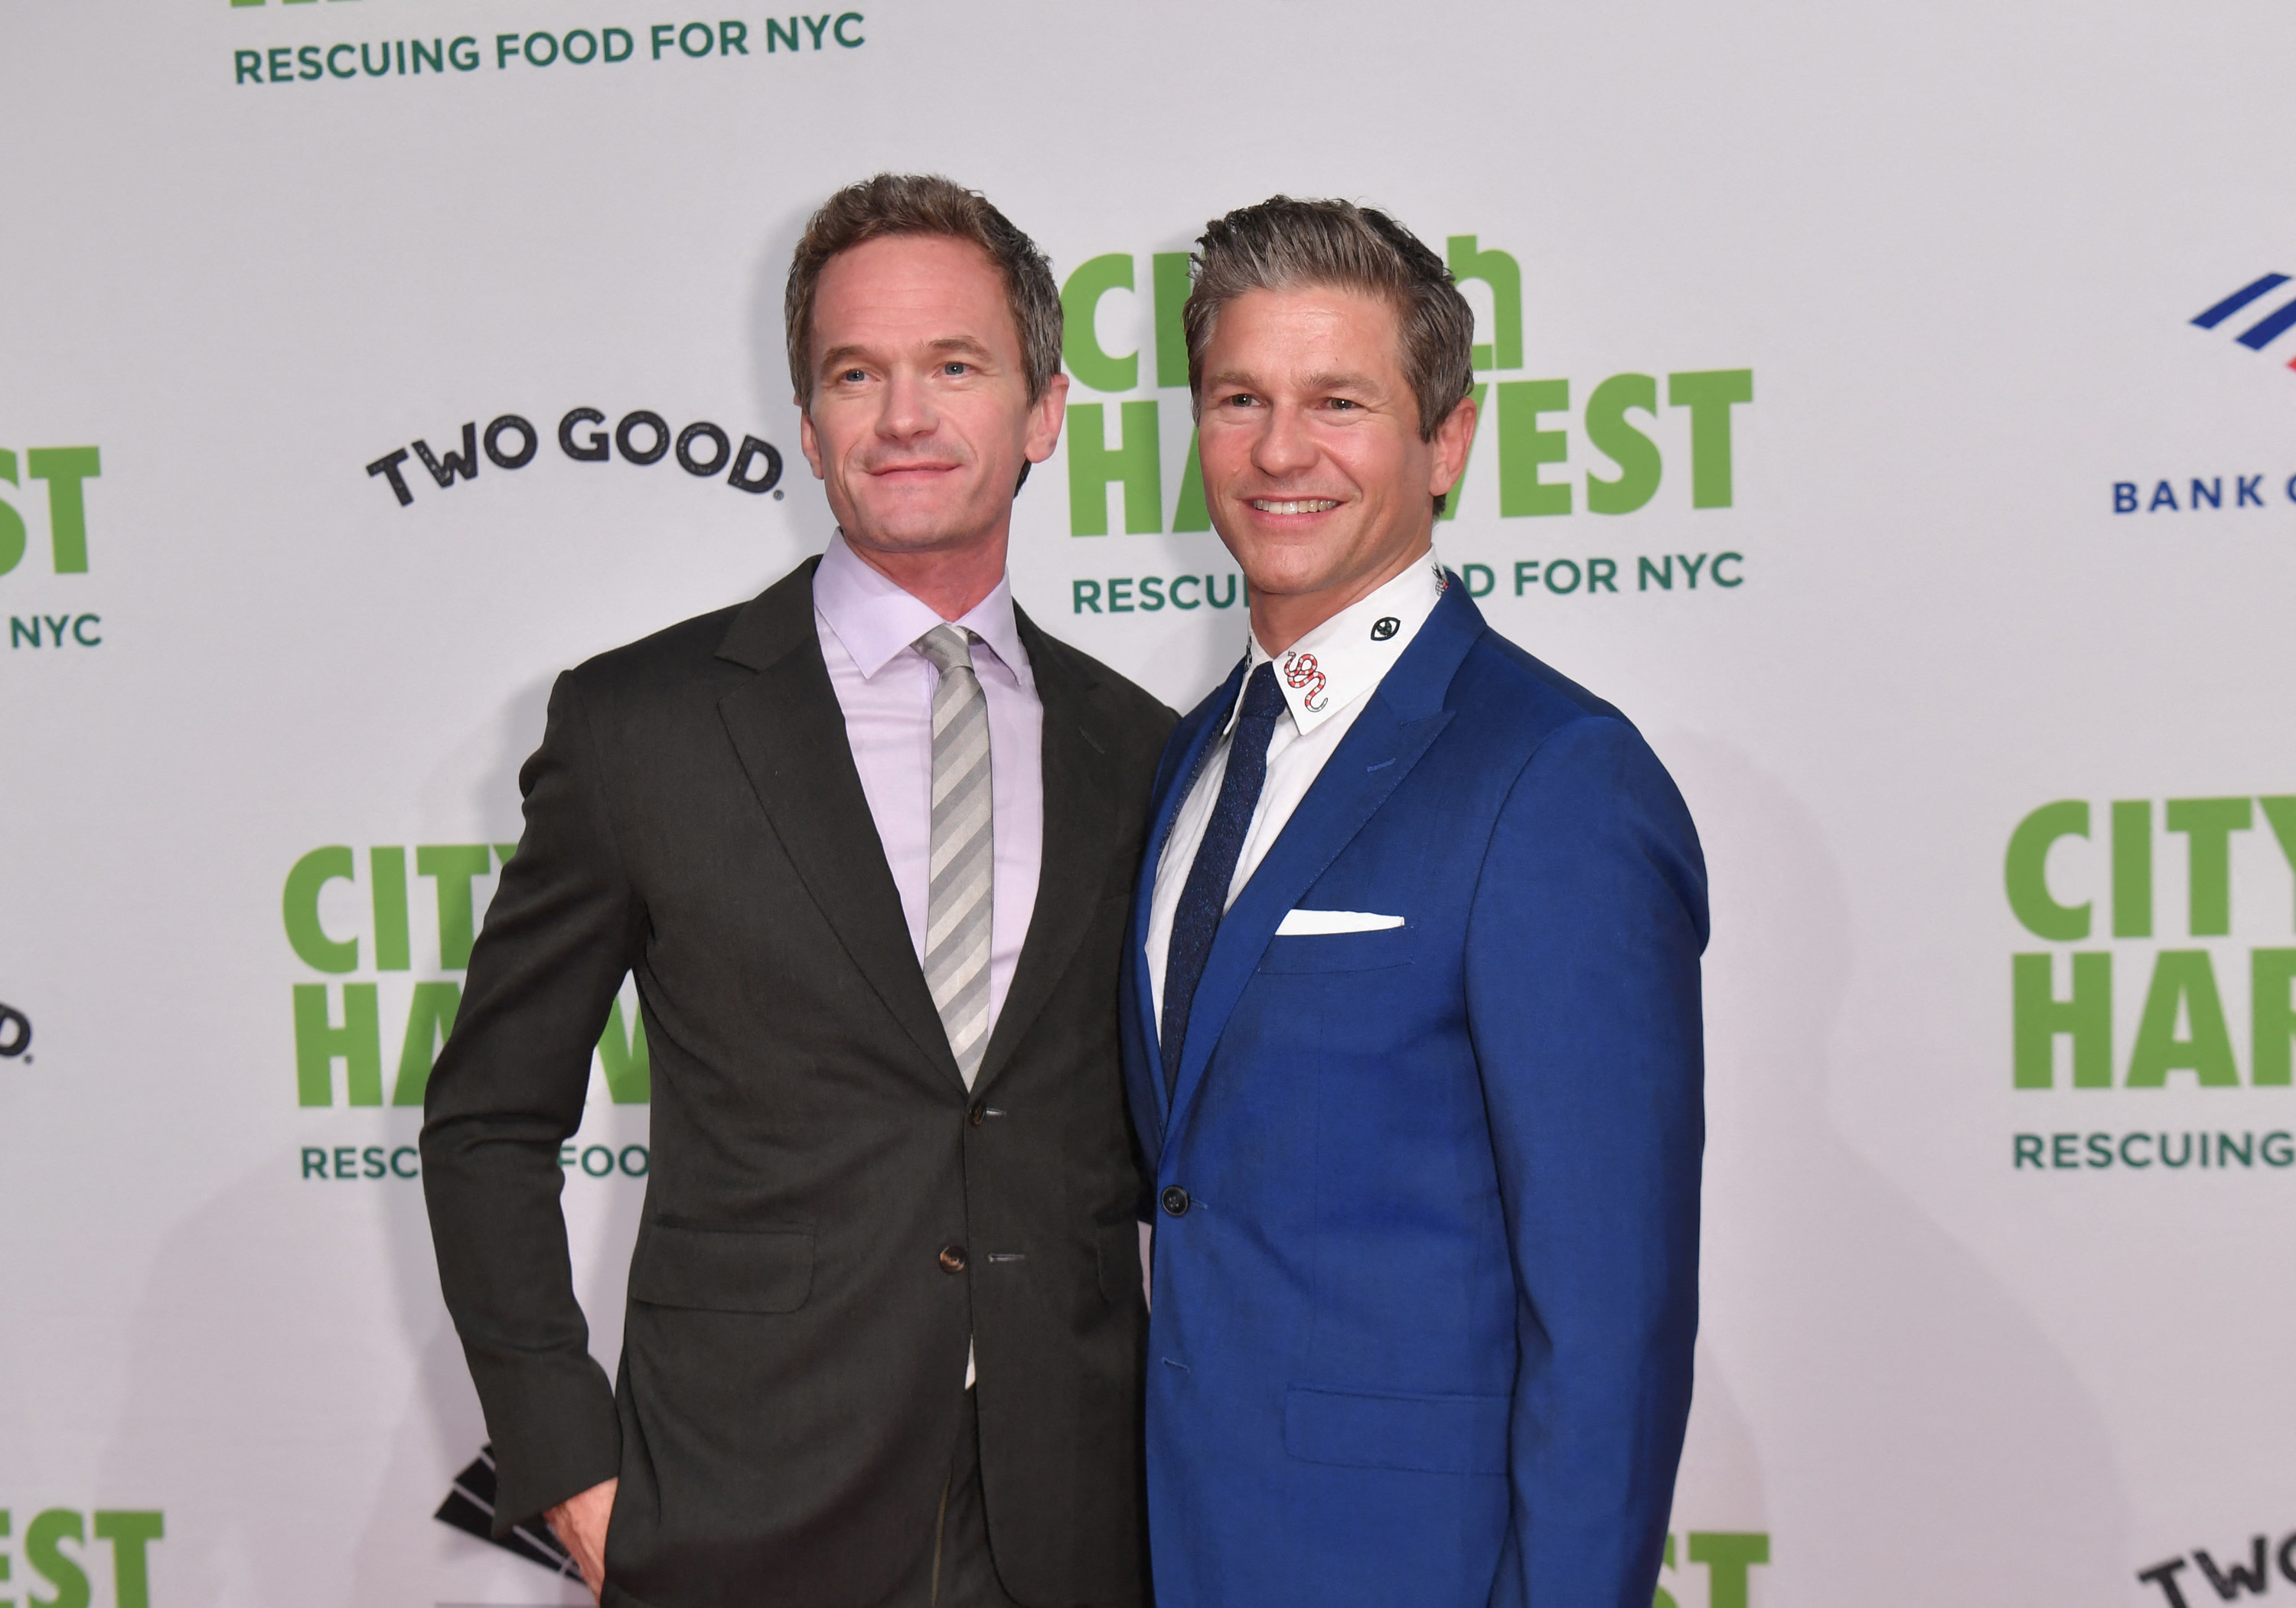 US actor Neil Patrick Harris and husband US actor and chef David Burtka attend the 2022 City Harvest &quot;Red Supper Club&quot; Fundraising Gala at Cipriani 42nd Street on April 26, 2022 in New York City